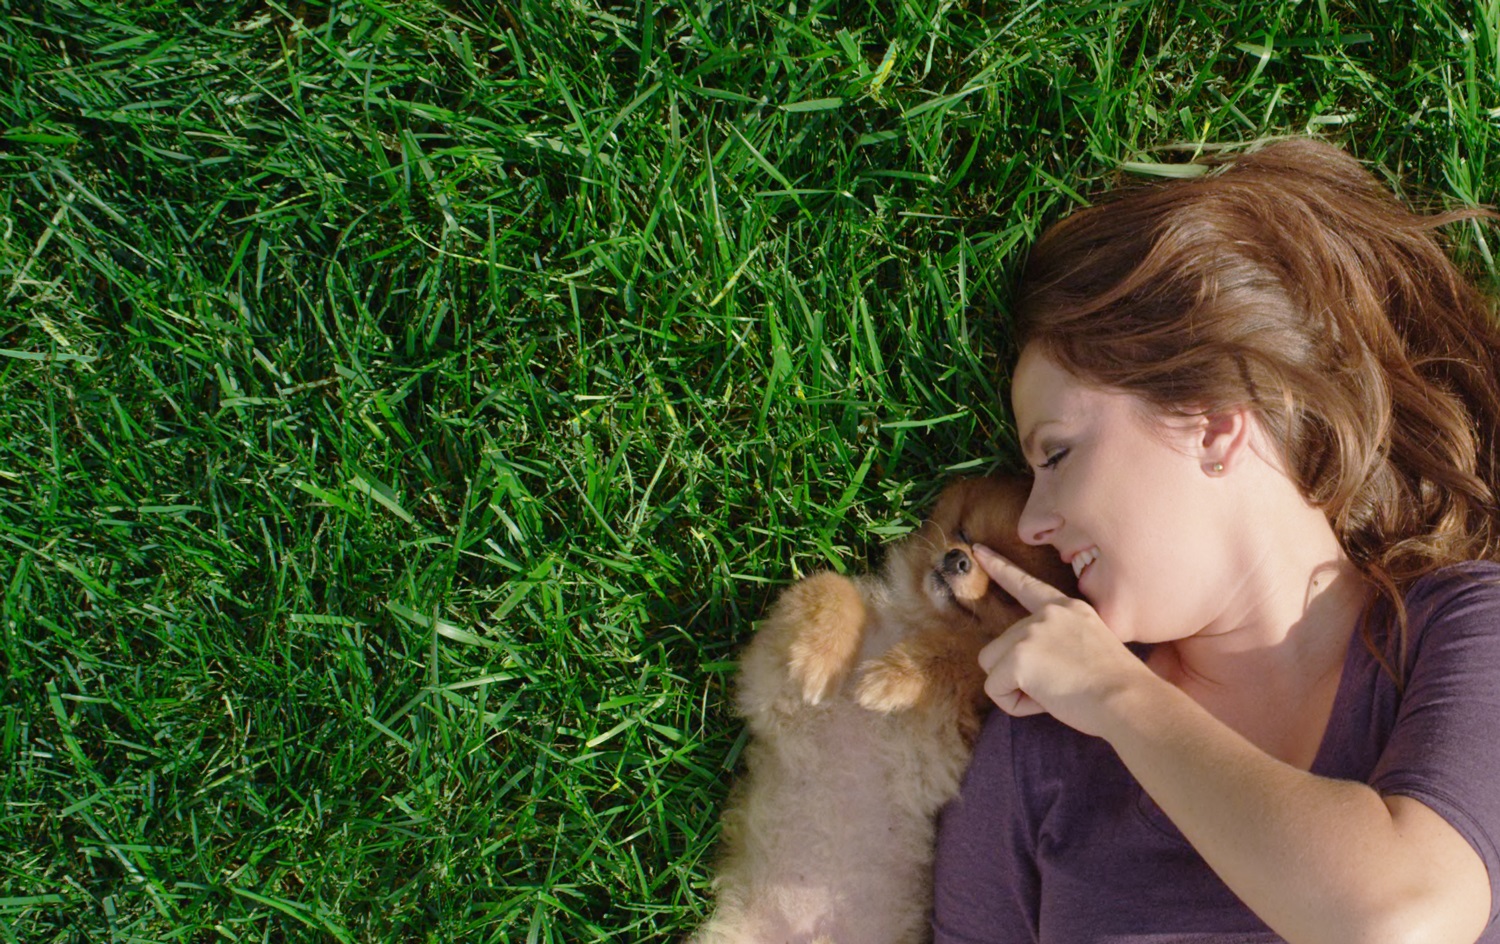 Pretty Woman playing with cute puppy on manicured green grass showing lawn care in Woodstock